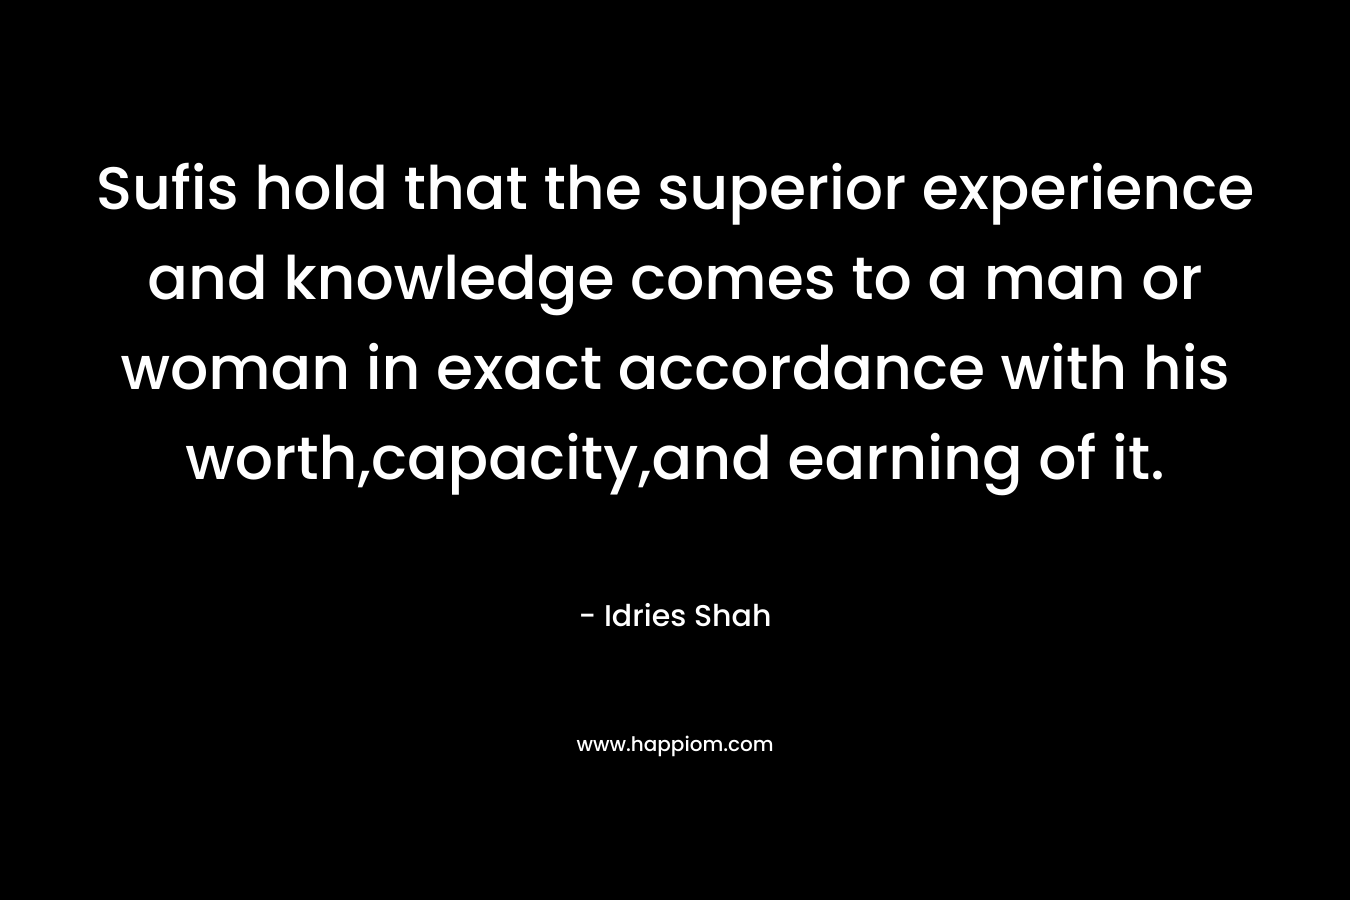 Sufis hold that the superior experience and knowledge comes to a man or woman in exact accordance with his worth,capacity,and earning of it. – Idries Shah